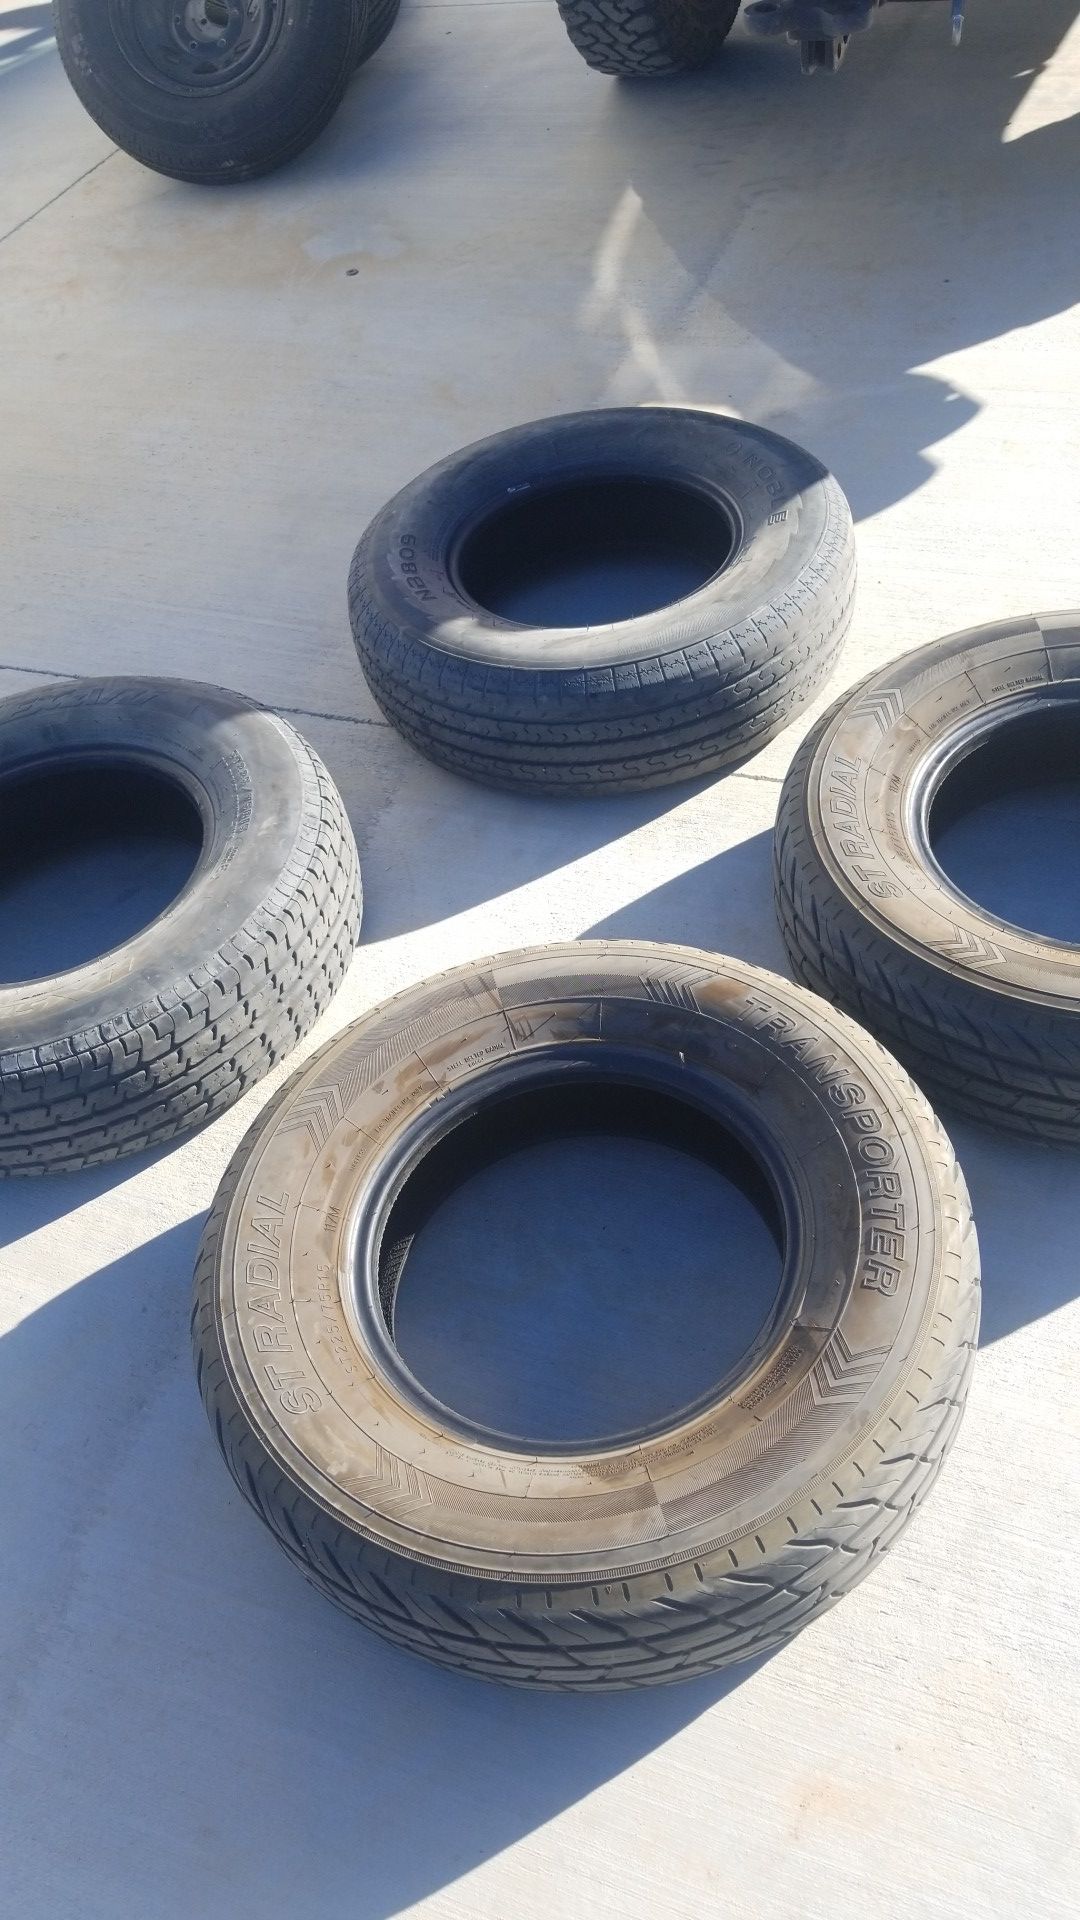 4 Trailer tires 225 75 15 10ply